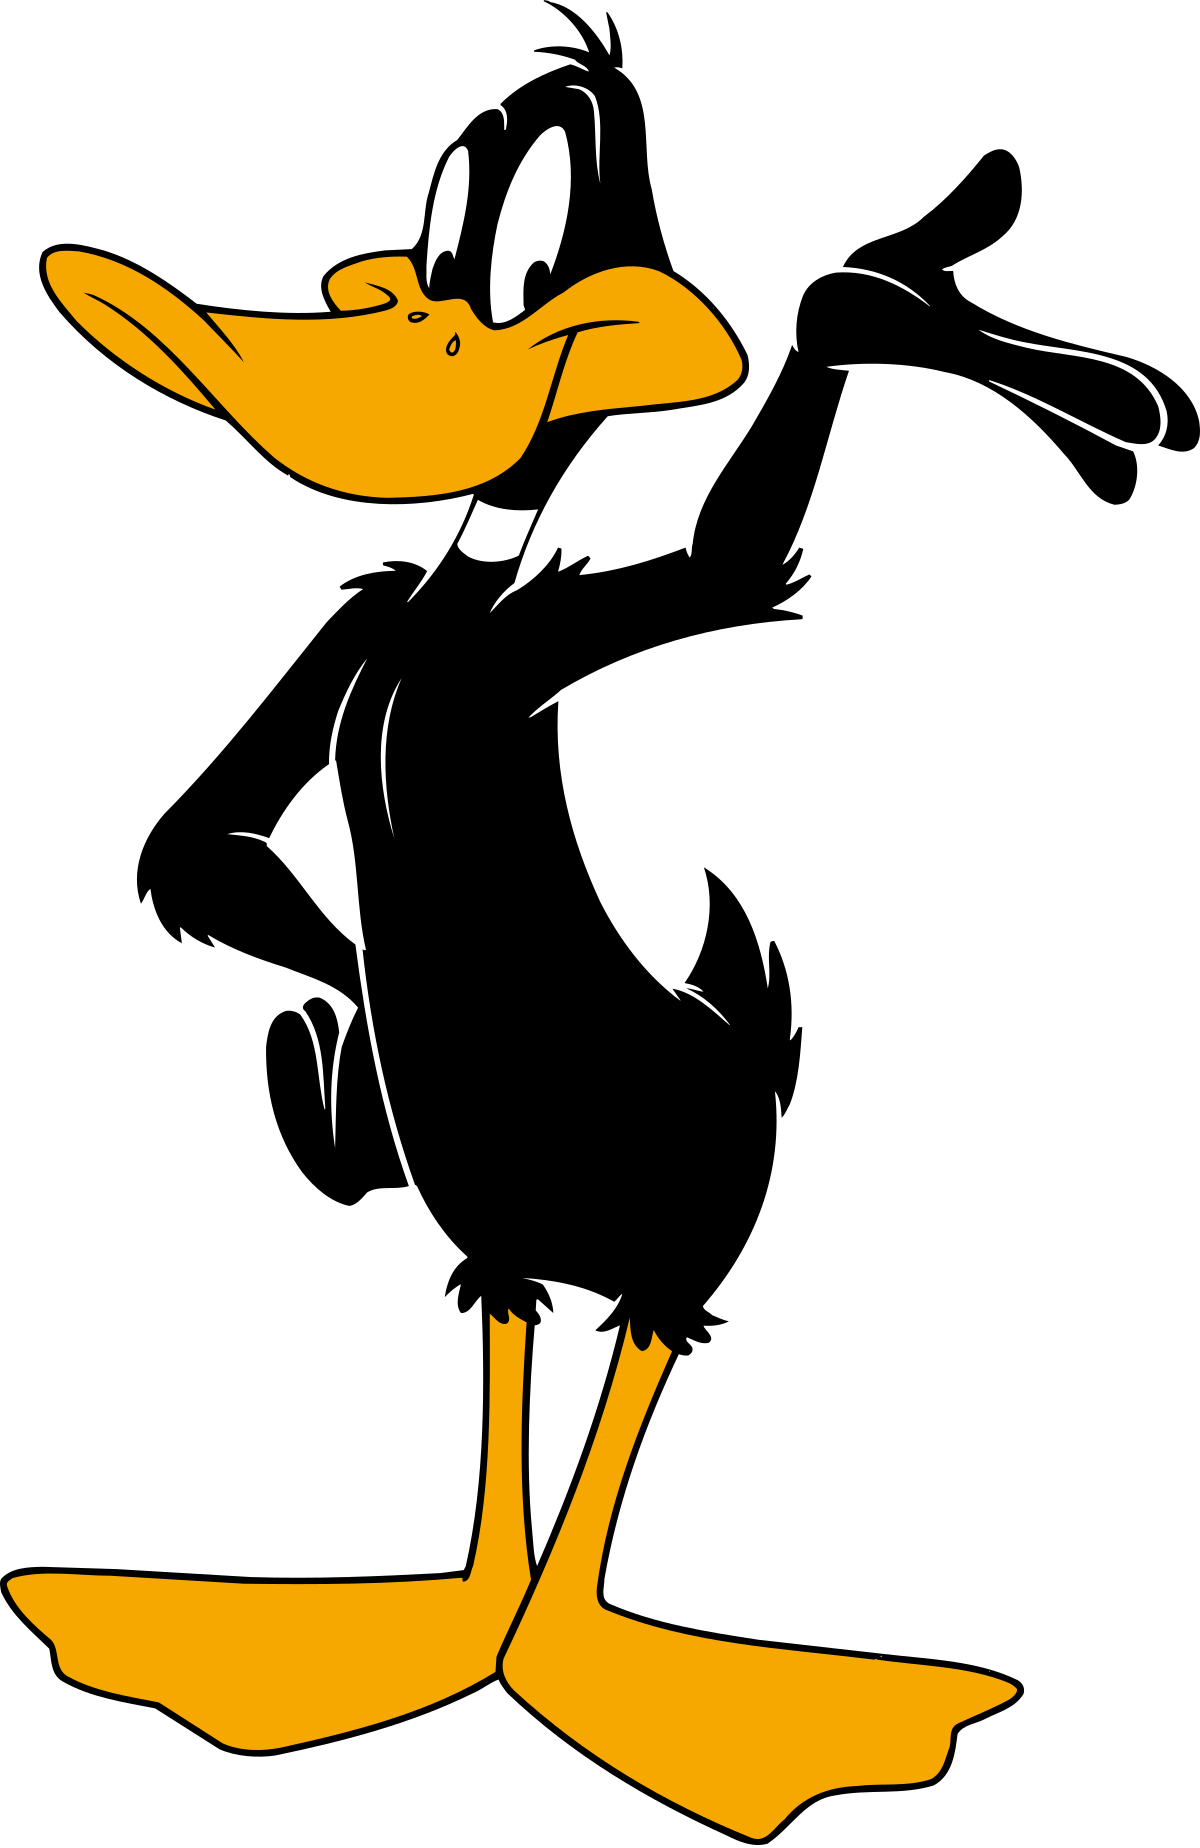 Face clipart bugs bunny. Daffy duck wikipedia 